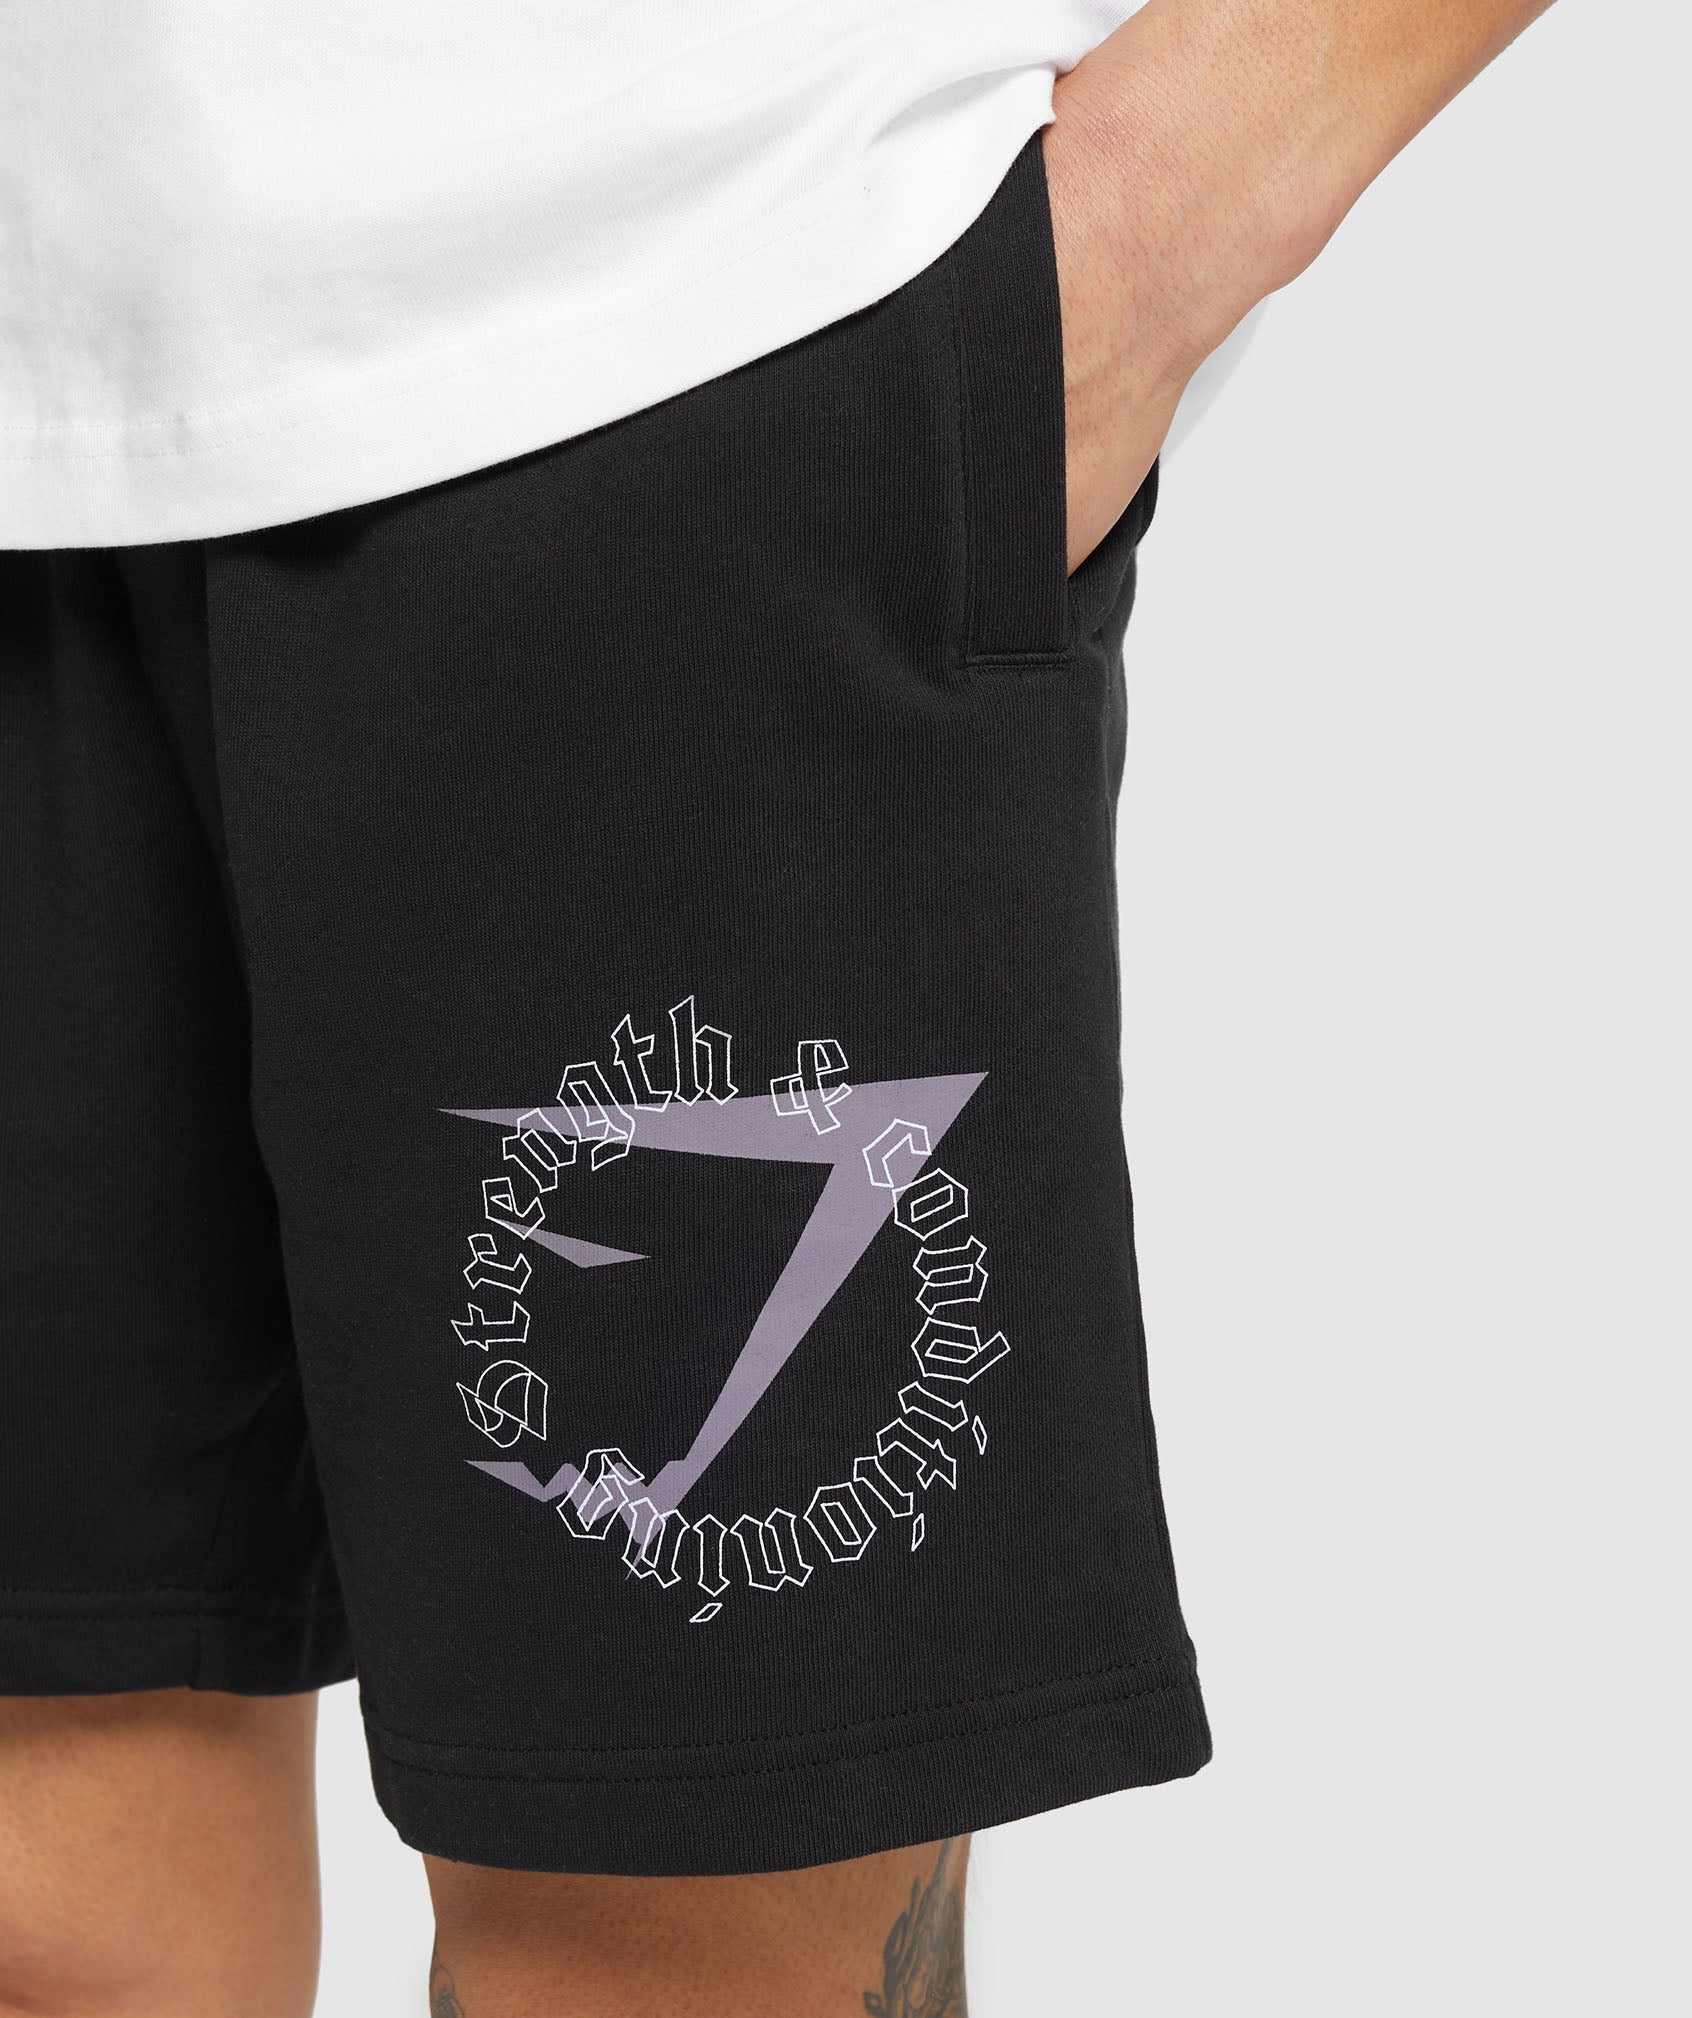 Strength and Conditioning 7" Shorts in Black - view 5